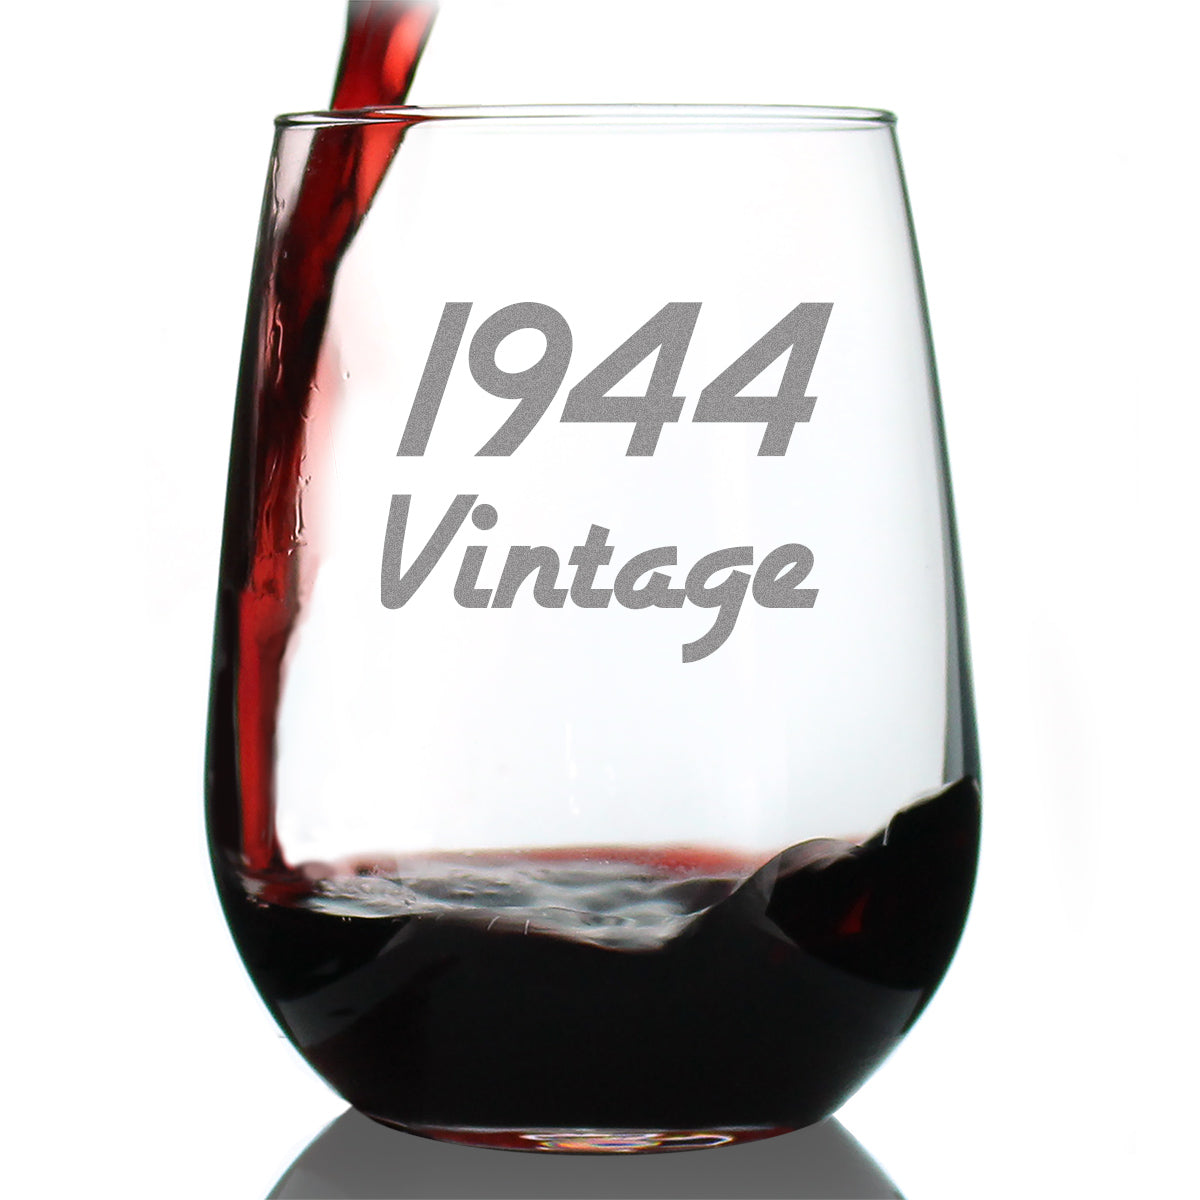 Vintage 1944 - 80th Birthday Stemless Wine Glass Gifts for Women &amp; Men Turning 80 - Bday Party Decor - Large Glasses